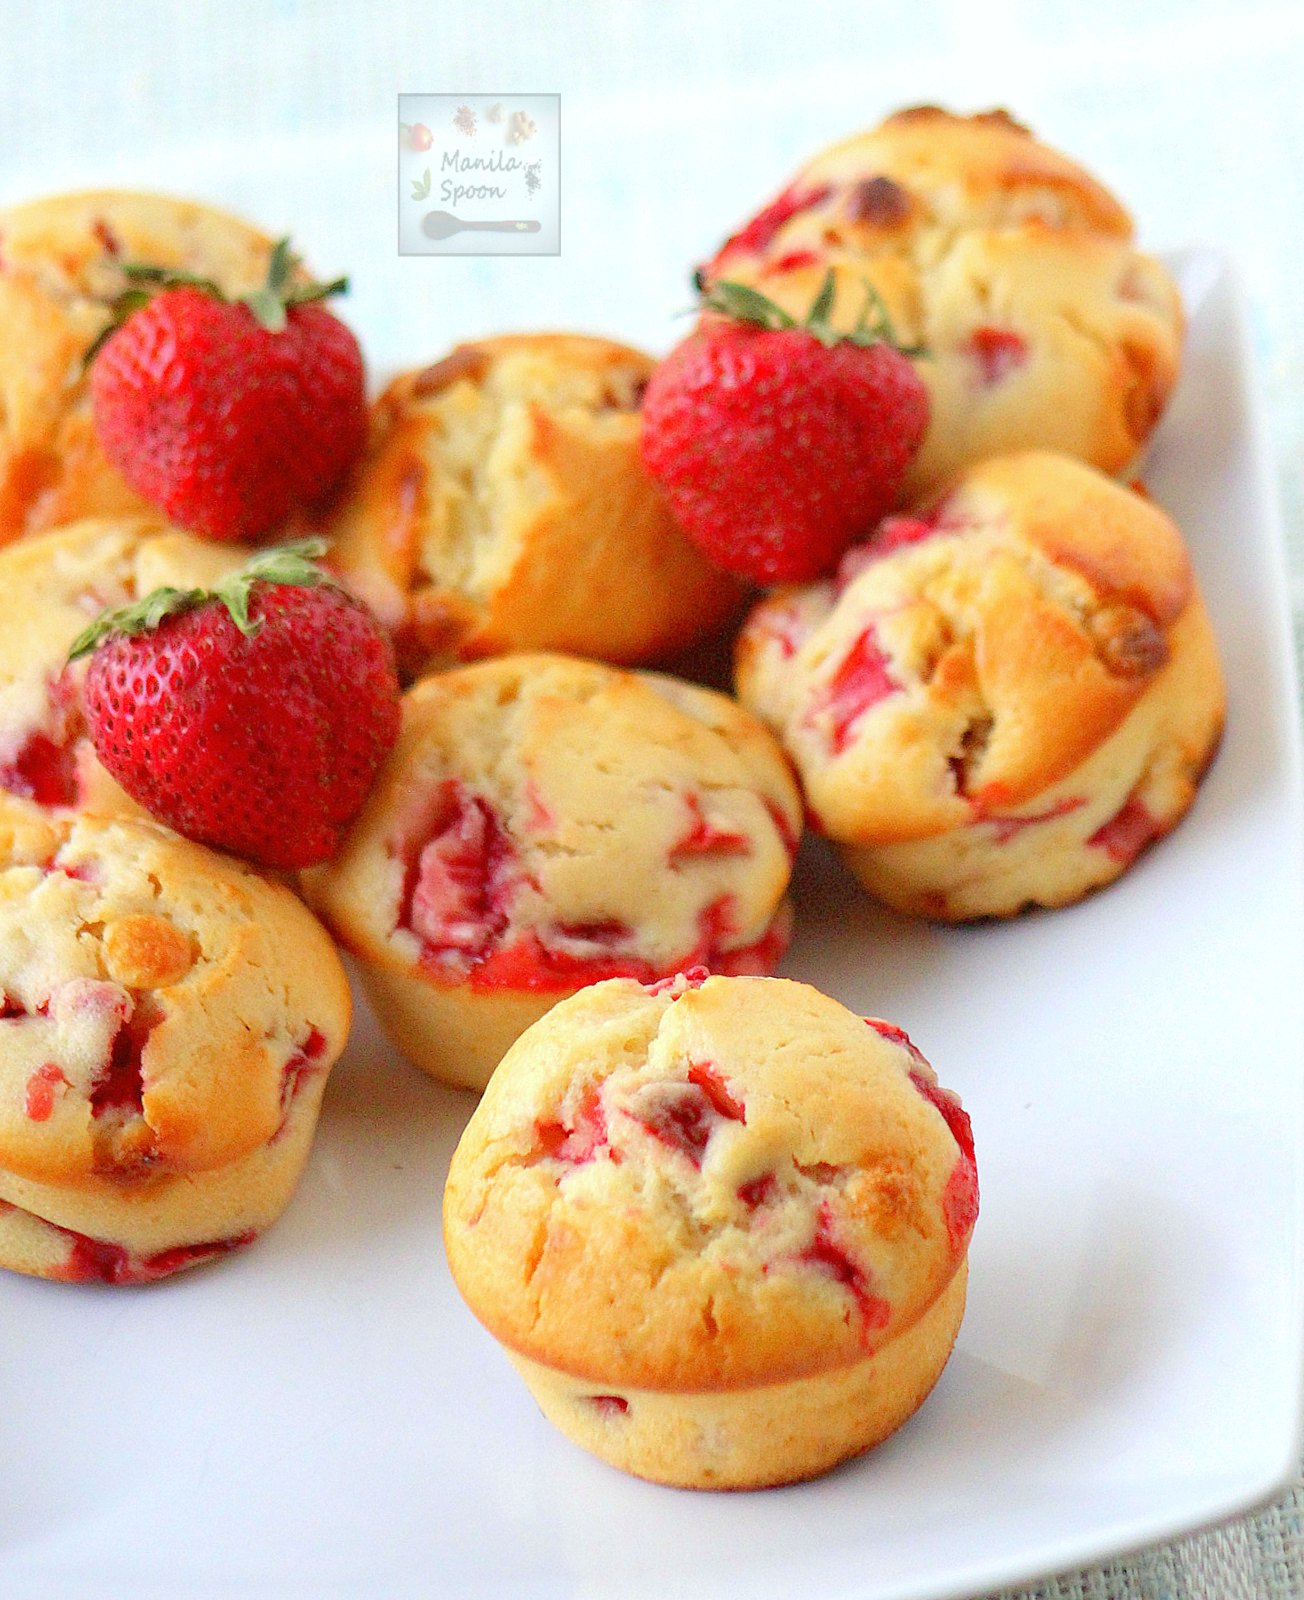 Tried and tested delicious master recipe for muffins. Add your favorite fruits and throw in some chocolate, too! This formula works and always comes out moist and yummy! No need for any mixer. | manilaspoon.com